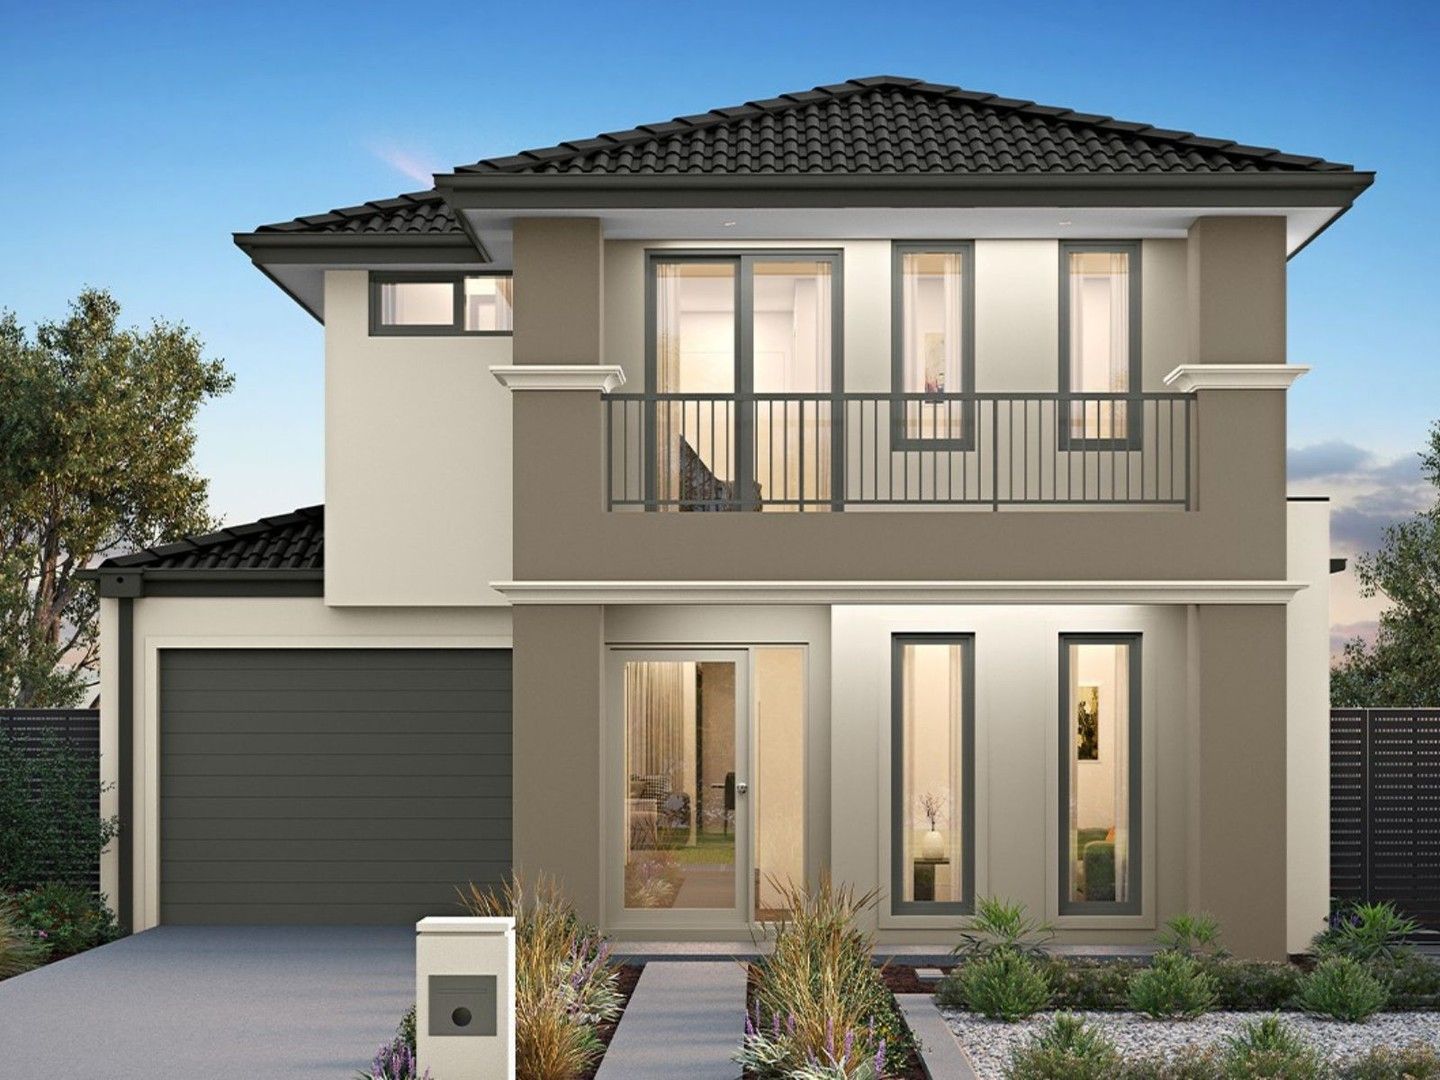 4 bedrooms New House & Land in Call To Inspect Display Home Today!! BOX HILL NSW, 2765